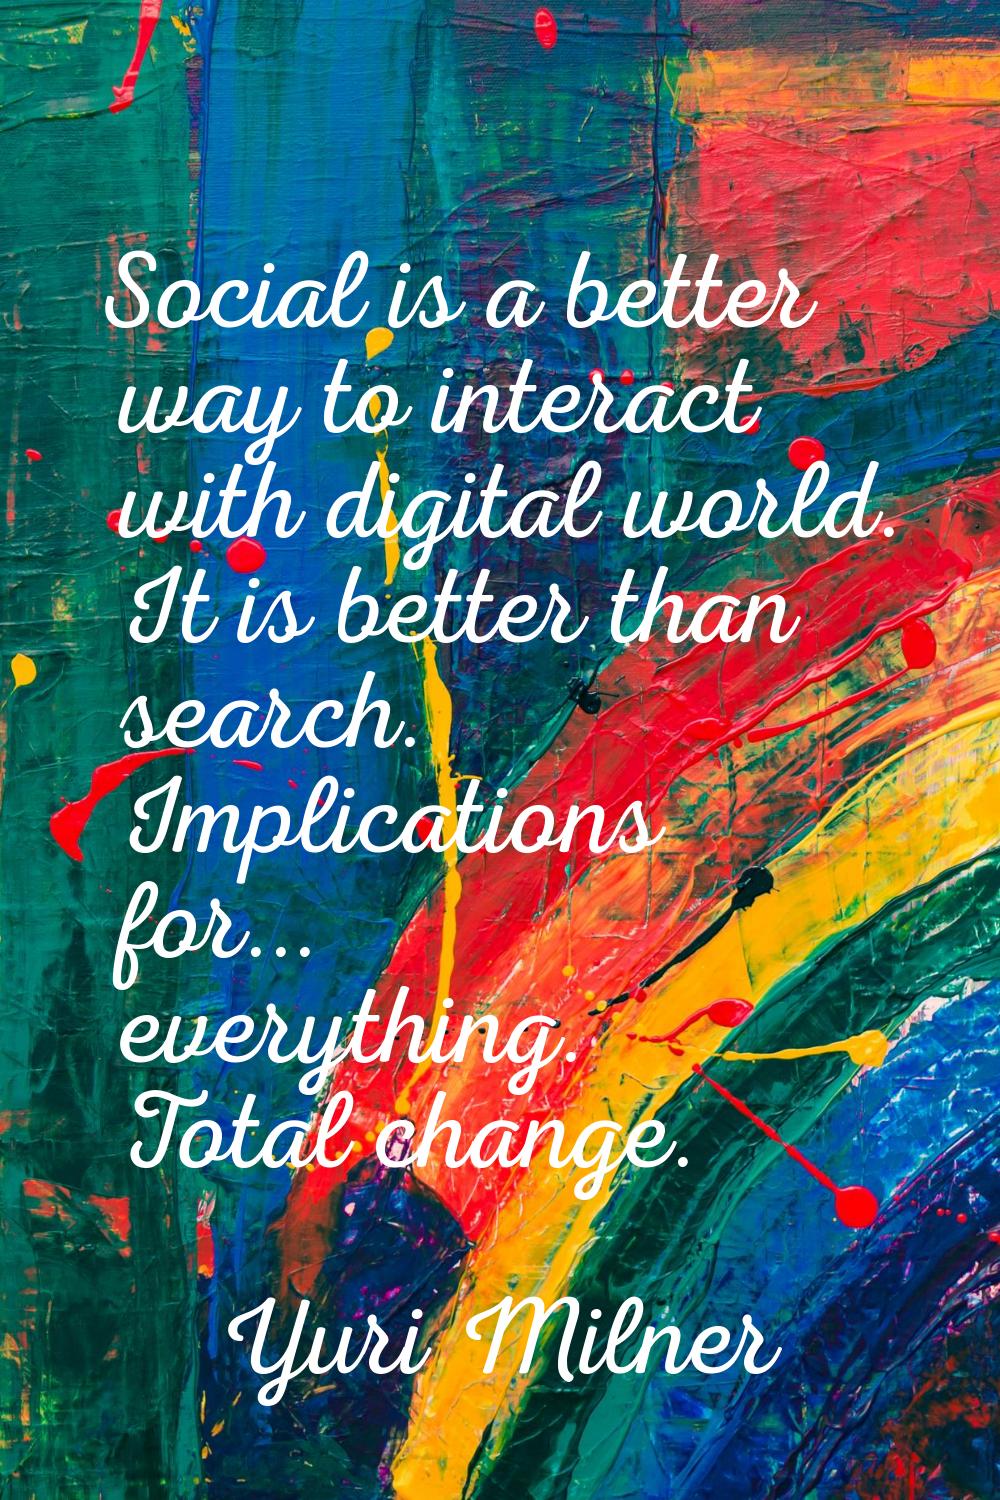 Social is a better way to interact with digital world. It is better than search. Implications for..